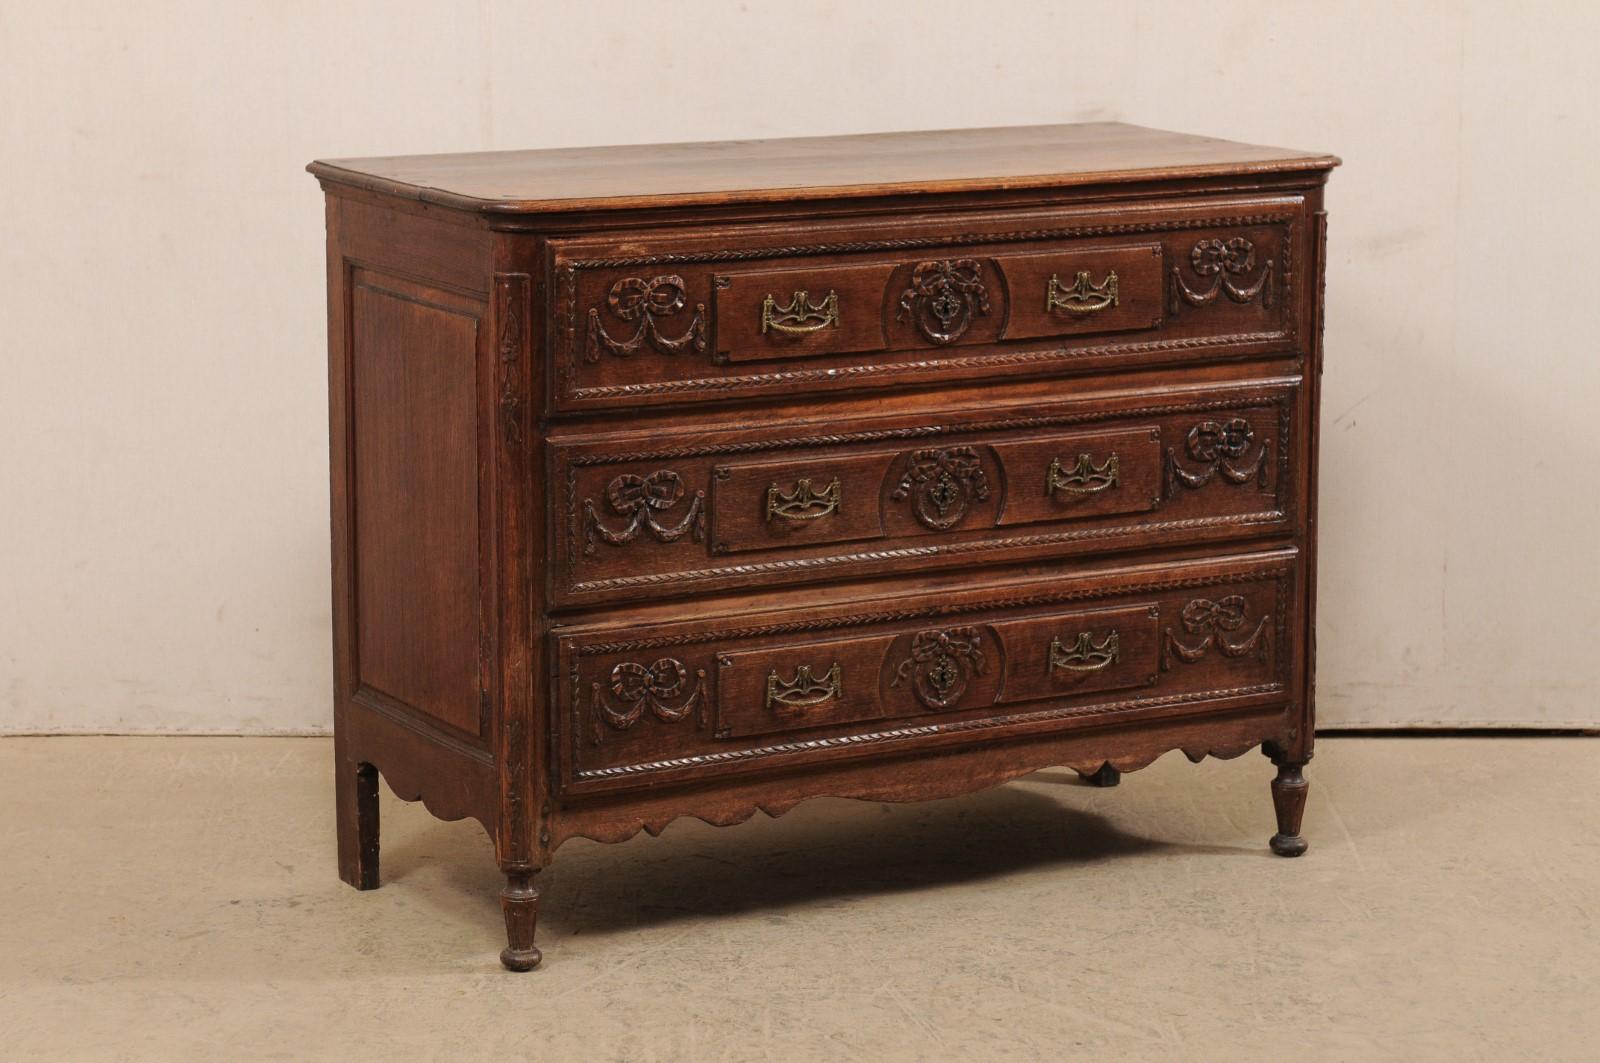 A French carved wood chest of three drawers from the early 19th century. This antique commode from France features a rectangular-shaped top with rounded front corners which rests above a case which houses three beautifully carved drawer fronts in a